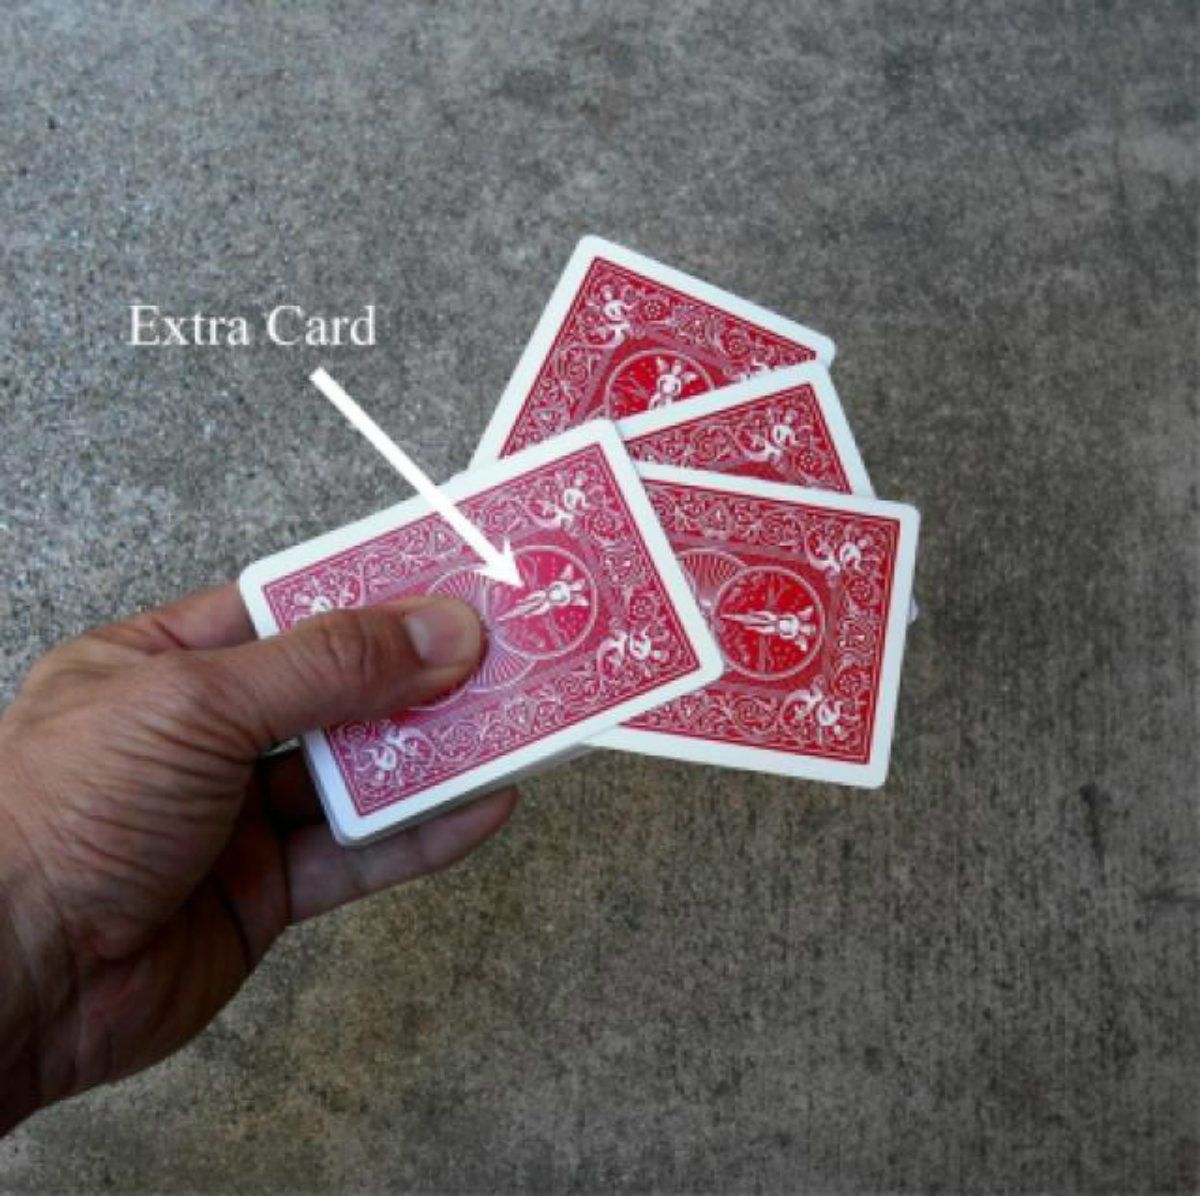 The World's Best Easy Card Trick